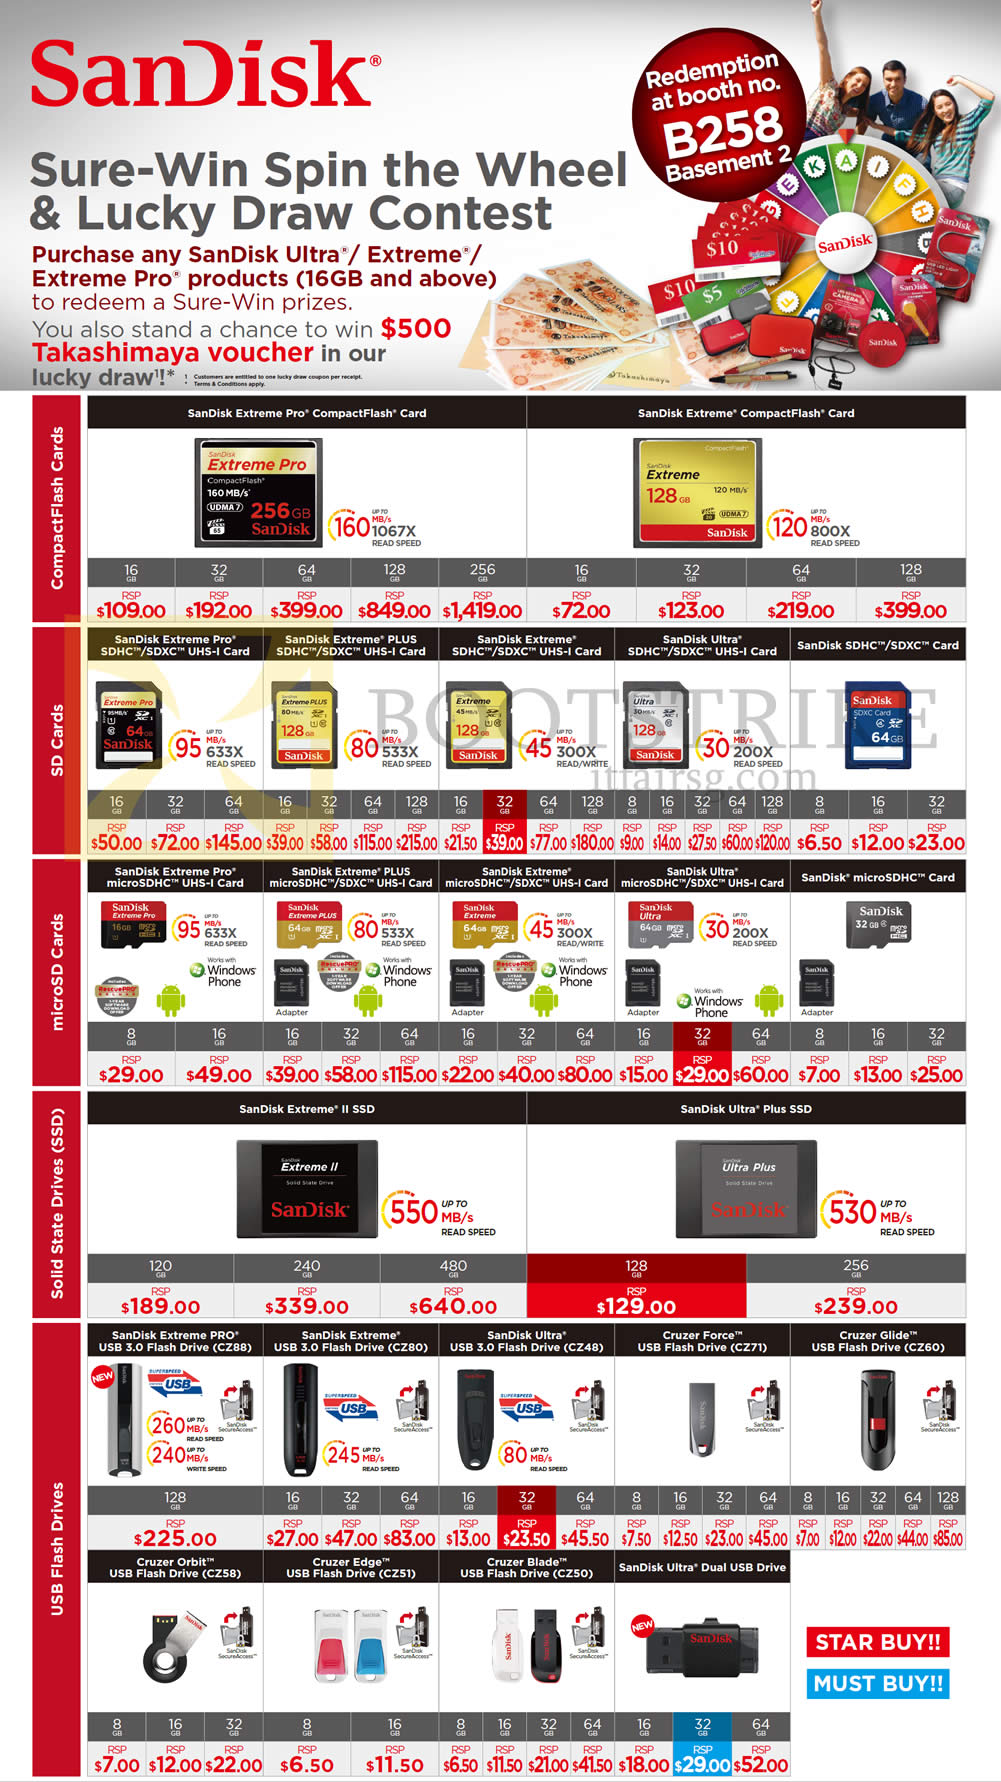 IT SHOW 2014 price list image brochure of Sandisk Memory Cards (RSP Prices) CompactFlash, MicroSD, SD, SSD Extreme II Ultra Plus, USB Flash Drives